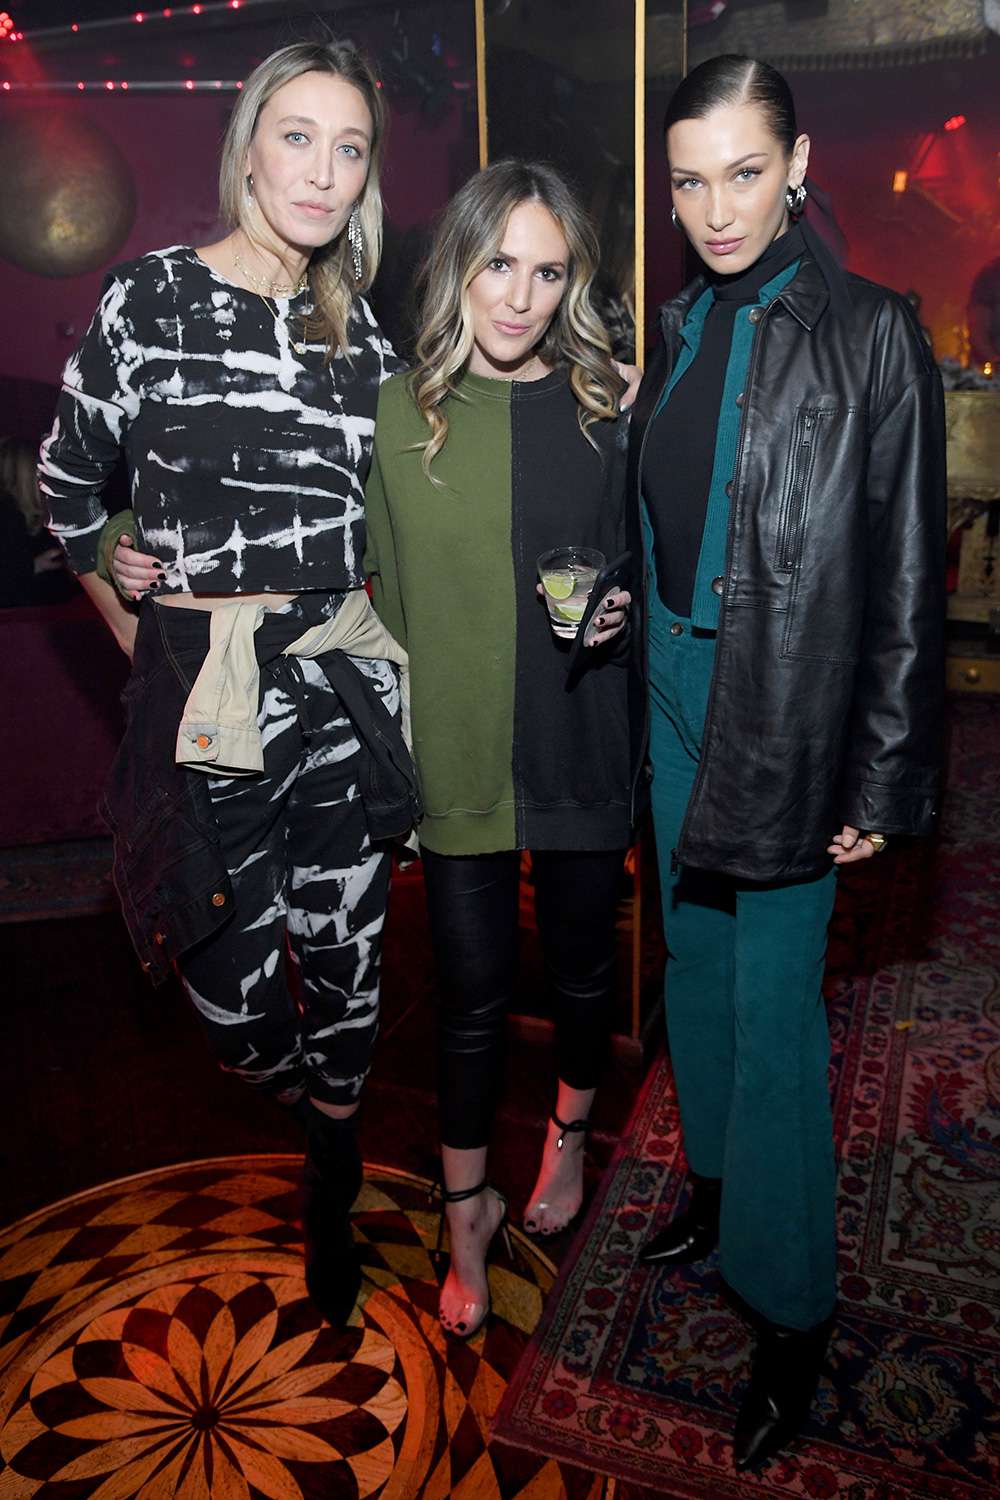 Alana Hadid, Emily Perlstein and Bella Hadid attend the La Detresse Launch Party FW2020 at Gospel Soho on February 08, 2020 in New York City